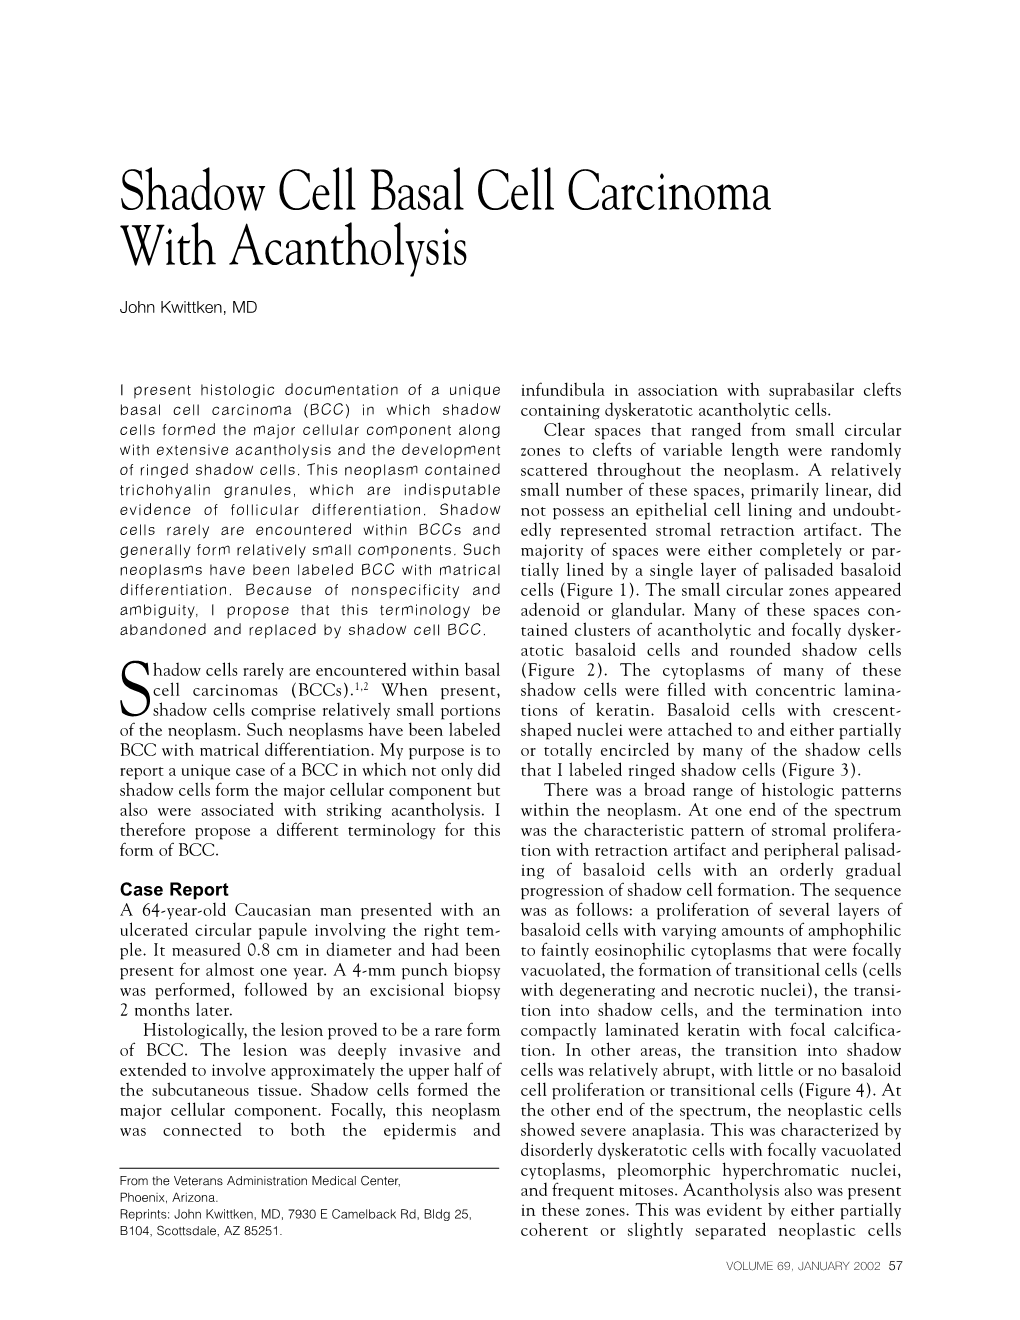 Shadow Cell Basal Cell Carcinoma with Acantholysis